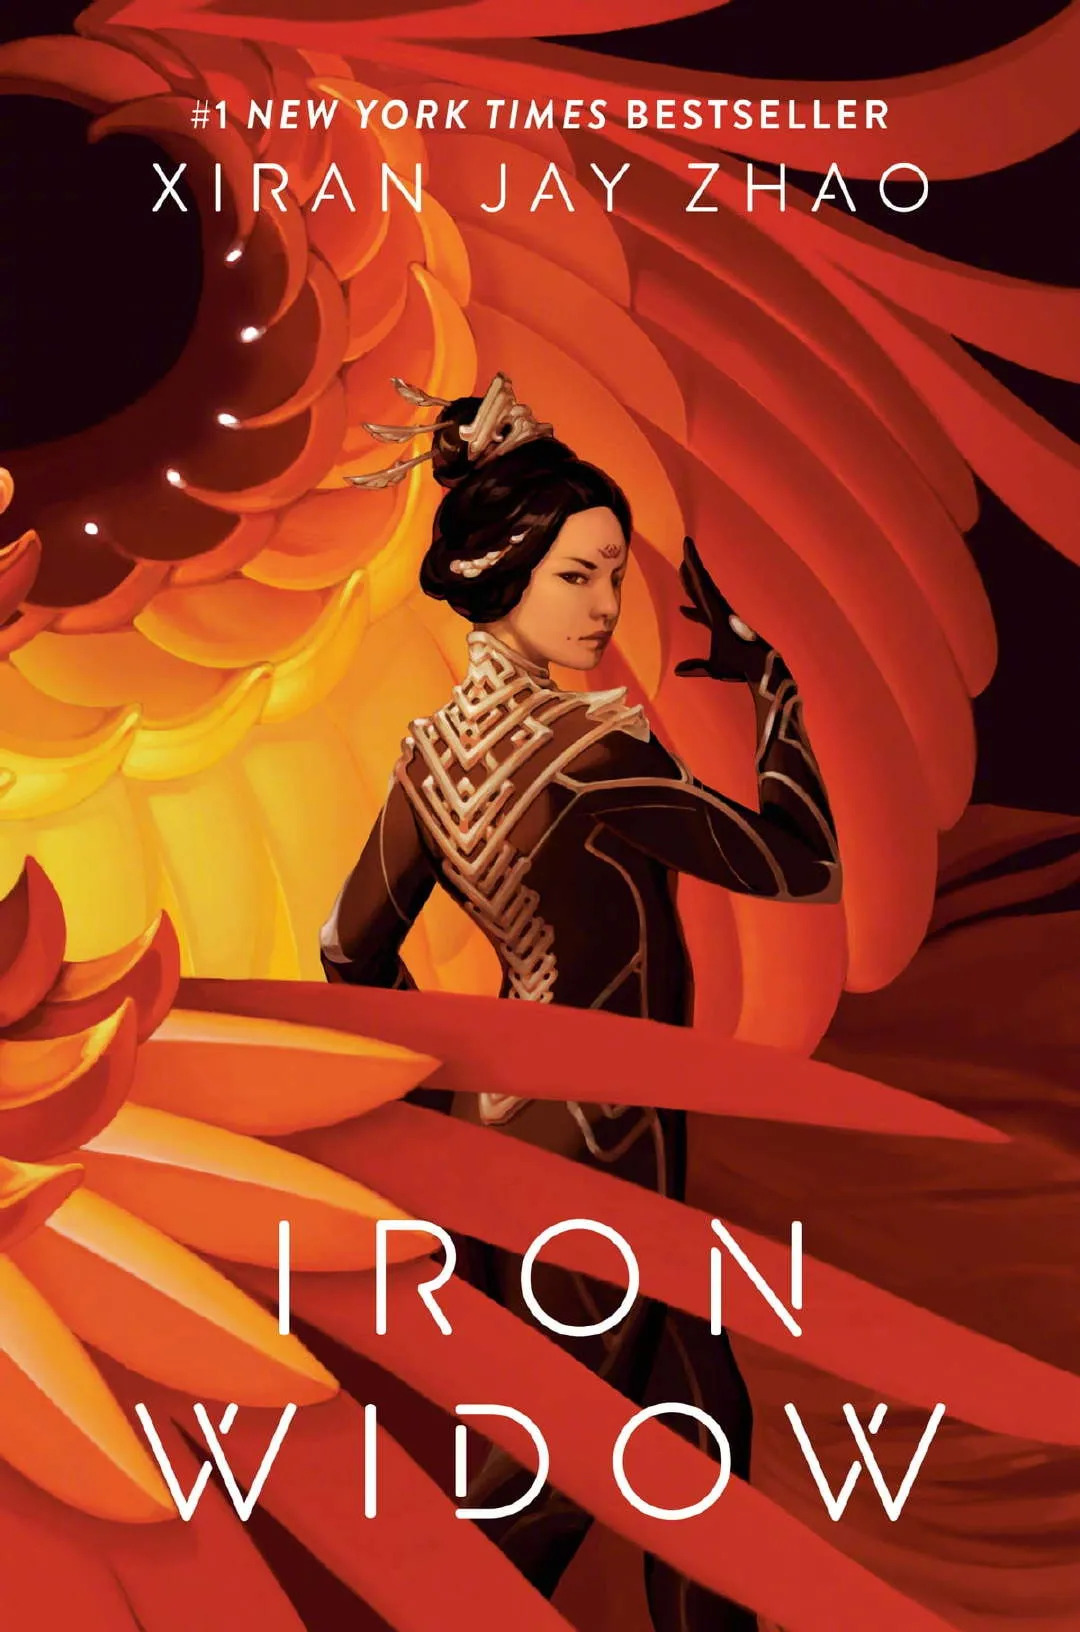 Xiran Jay Zhao's bestselling novel 'Iron Widow' to be made into a Hollywood movie | FMV6